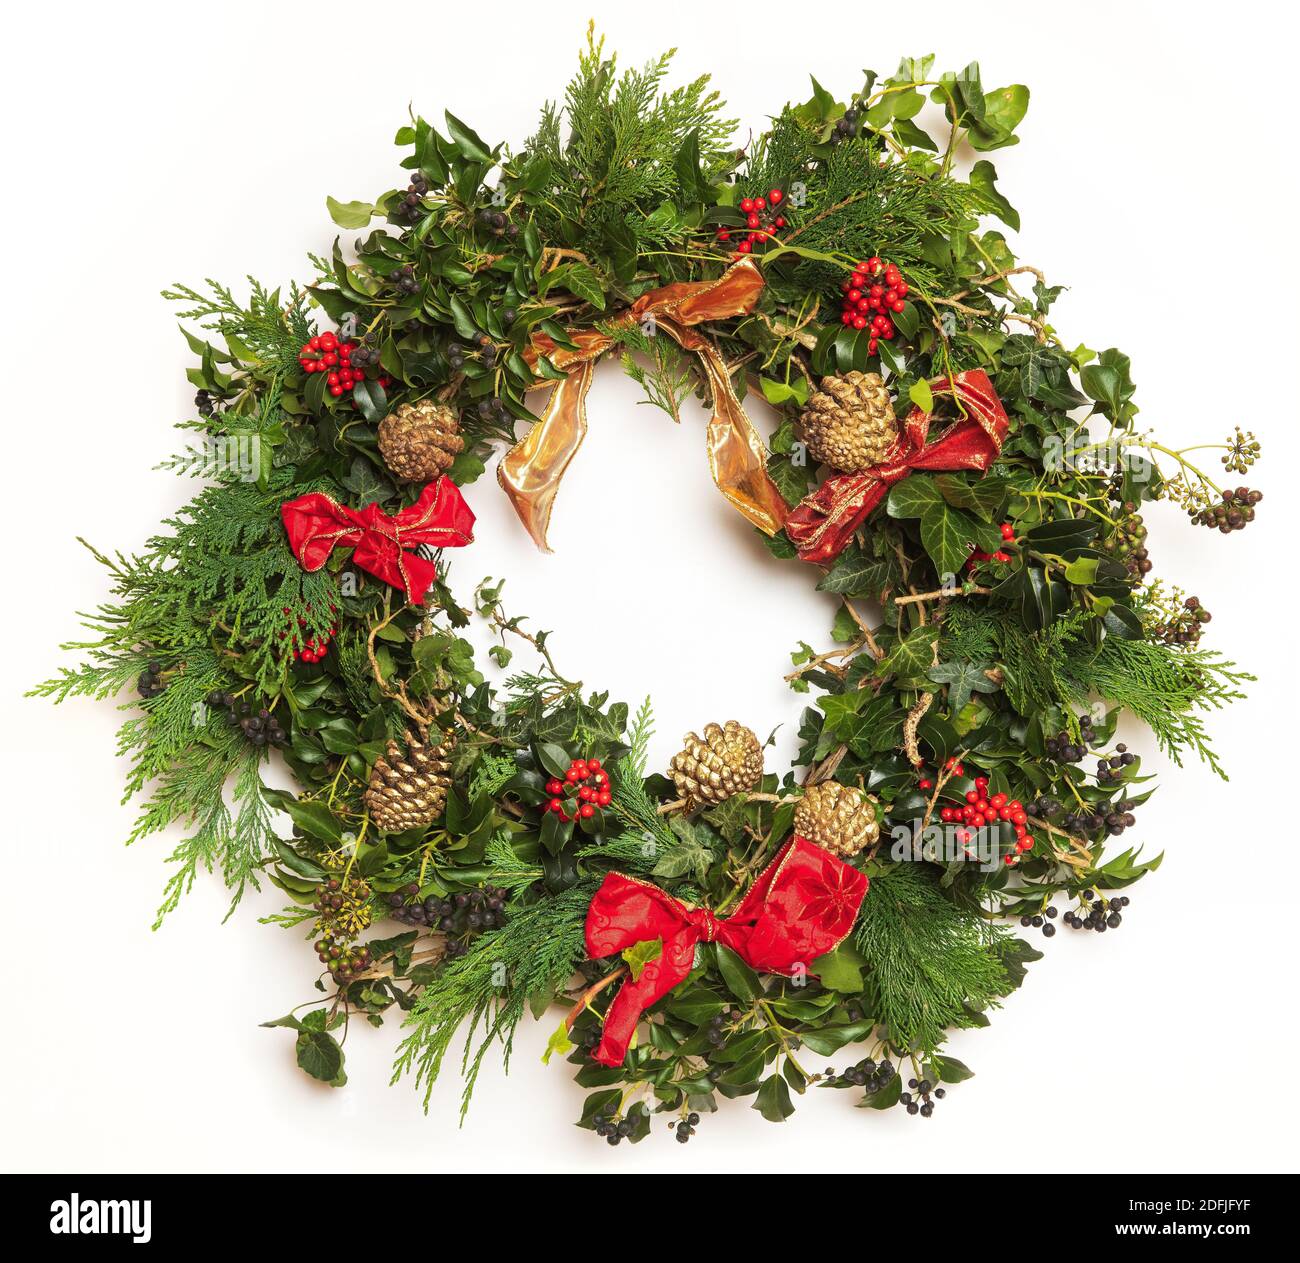 Isolated home made festive Christmas wreath made from ivy, holly, Conifer, Fir cones and ribbons. Stock Photo